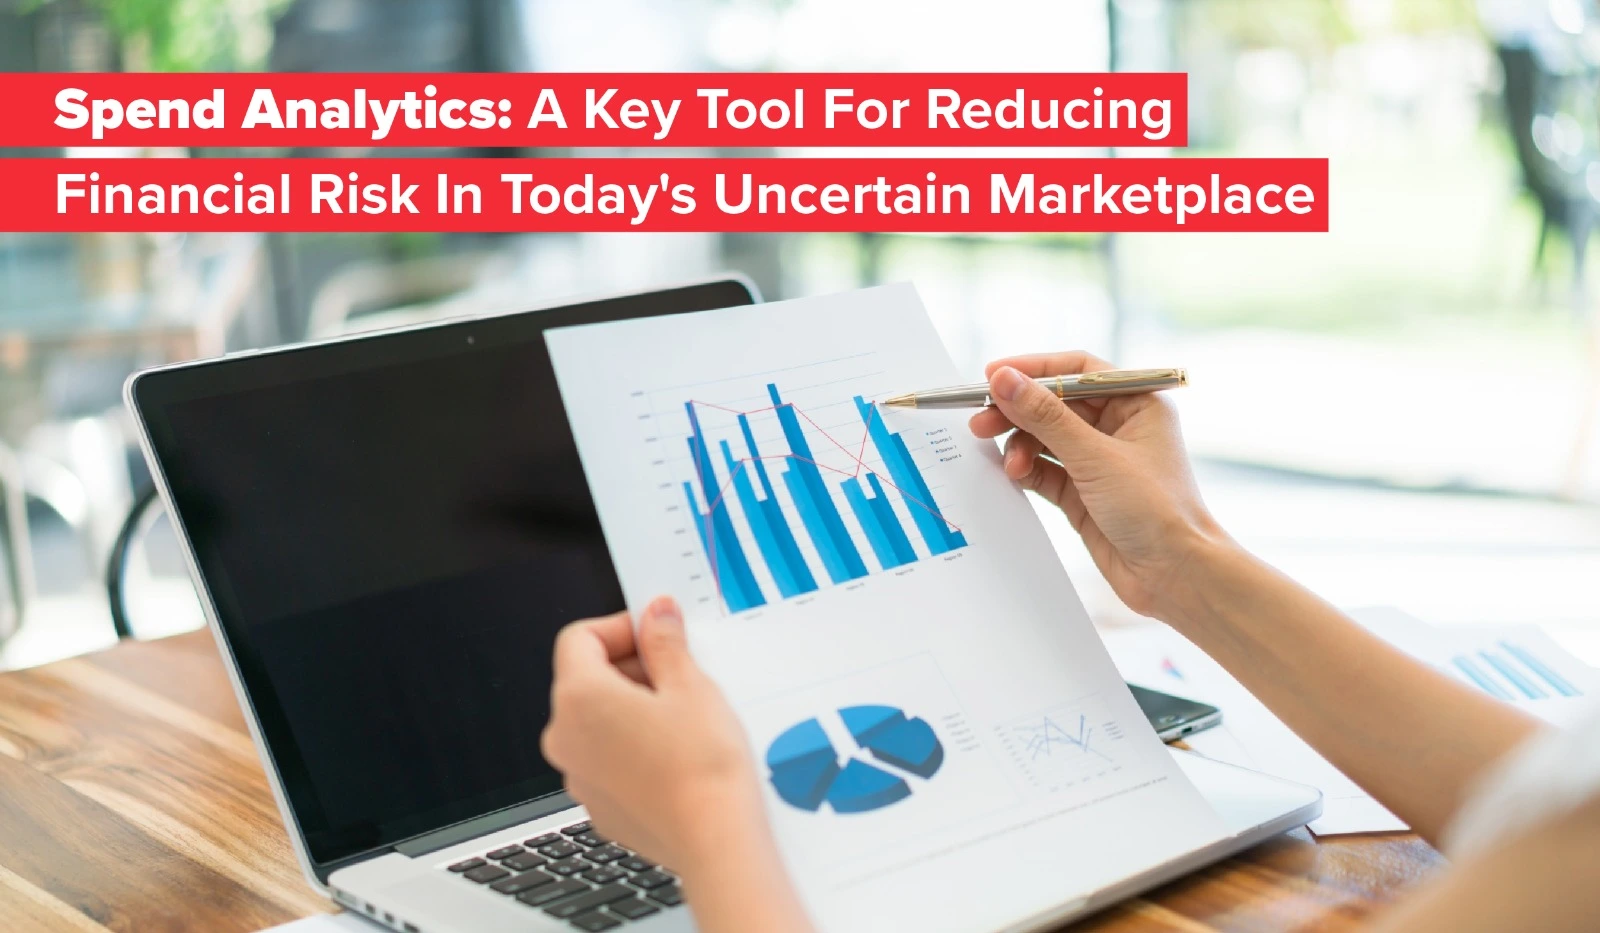 Spend Analytics A Key Tool For Reducing Financial Risk In Today's Uncertain Marketplace